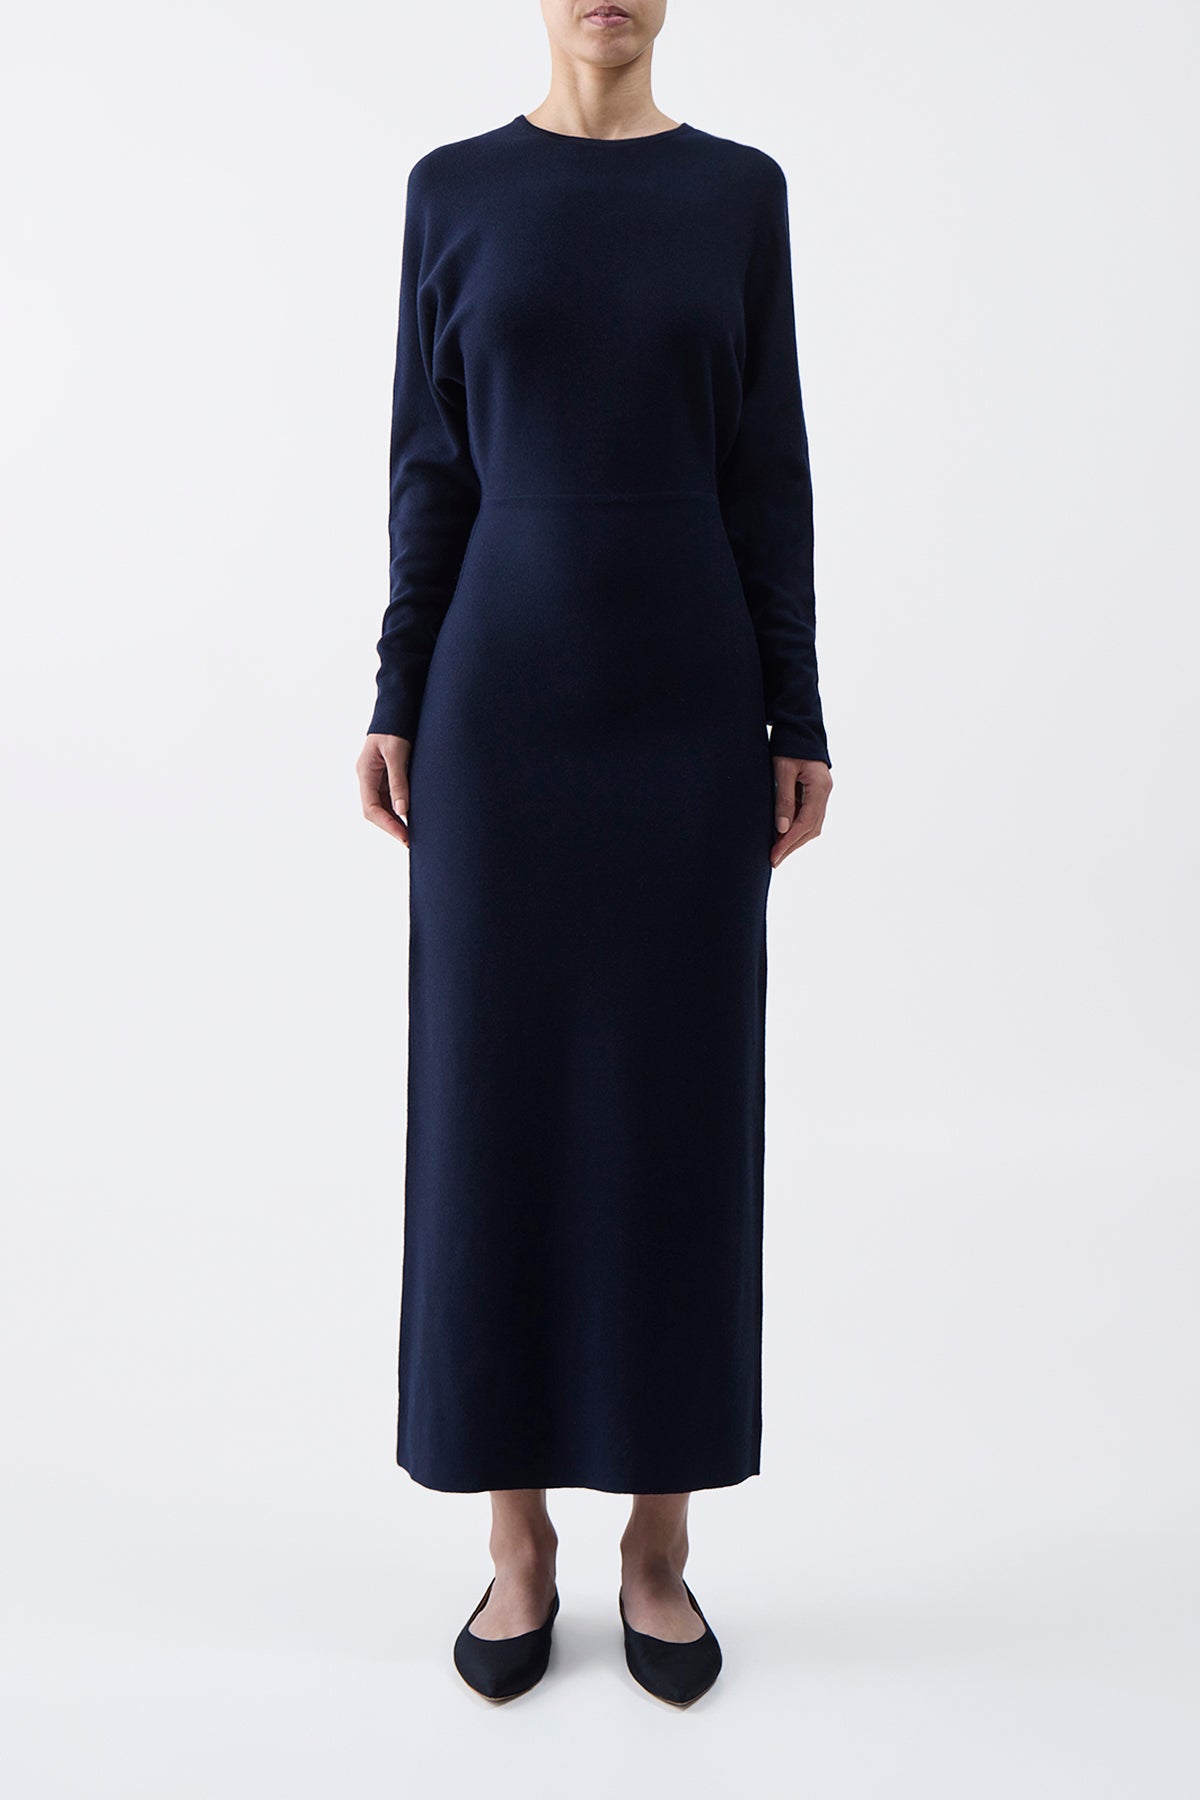 Semaine Knit Dress in Navy Silk Cashmere